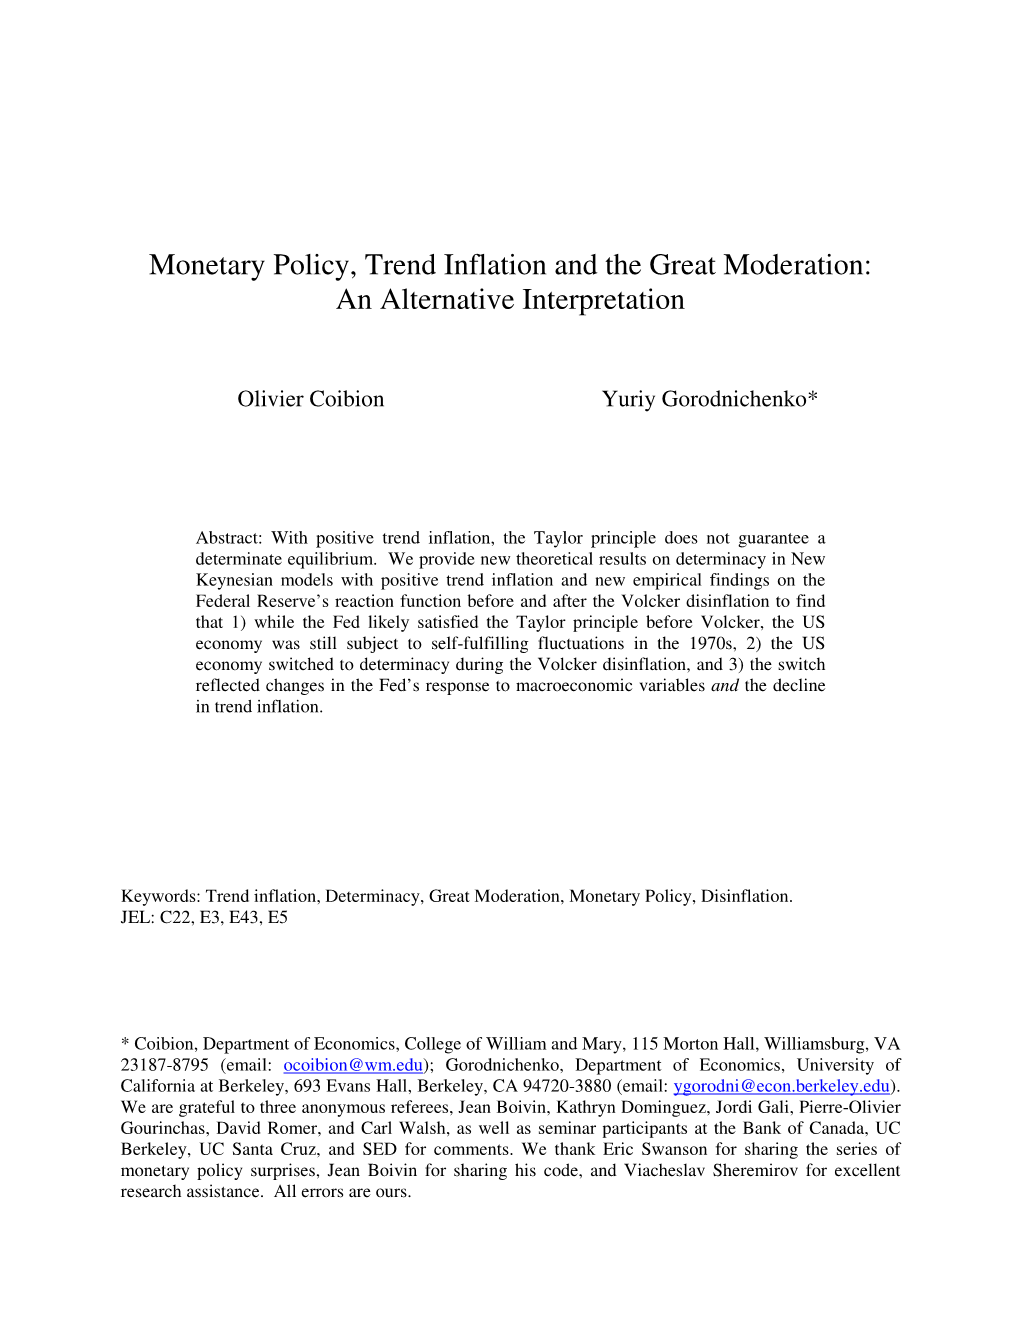 Monetary Policy, Trend Inflation and the Great Moderation: an Alternative Interpretation